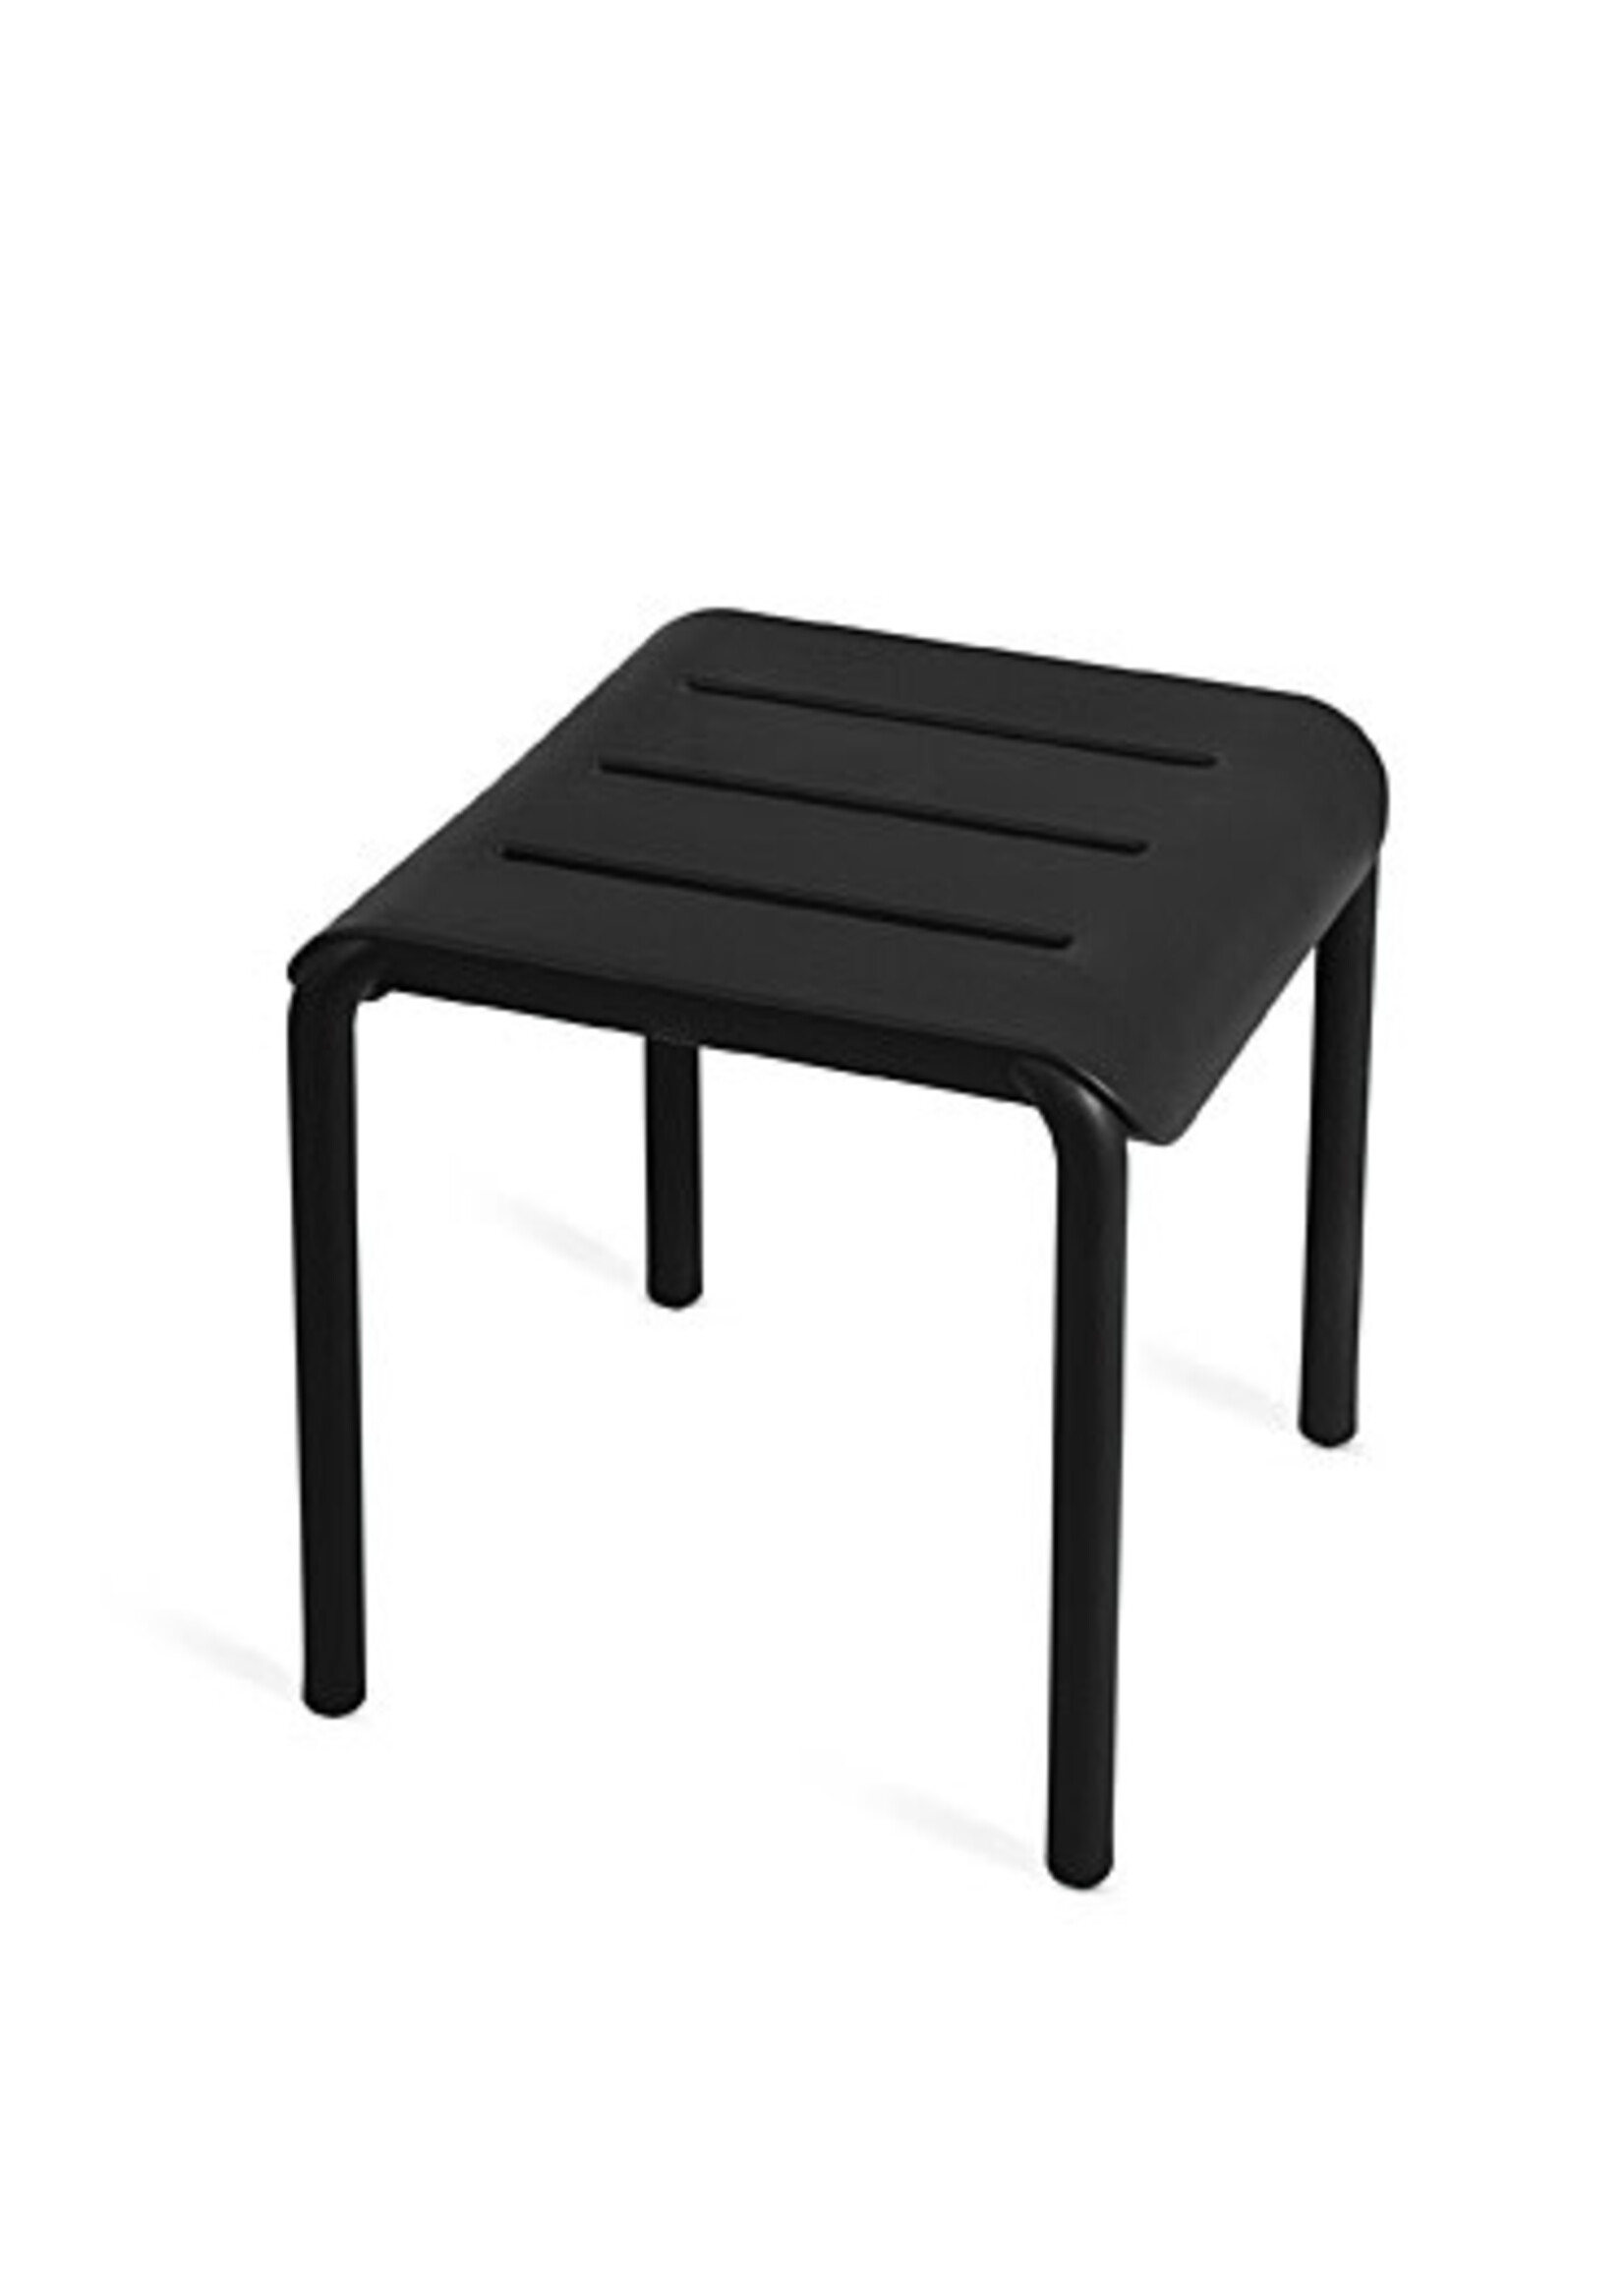 TOOU  Table d'Appoint Hocker OUTO (Choisir Couleur)